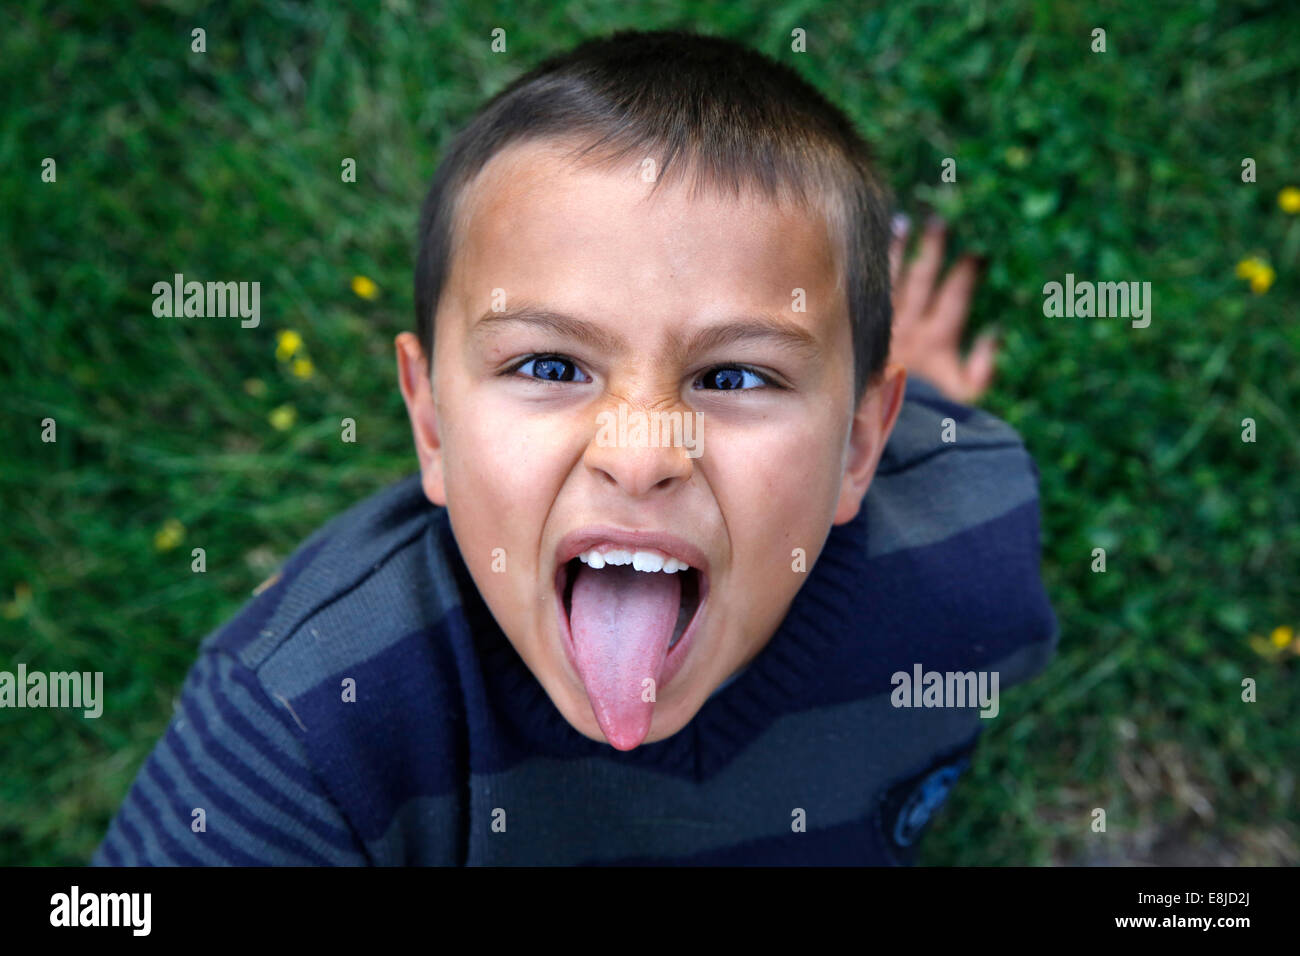 7-year-old boy pulling his tongue Stock Photo